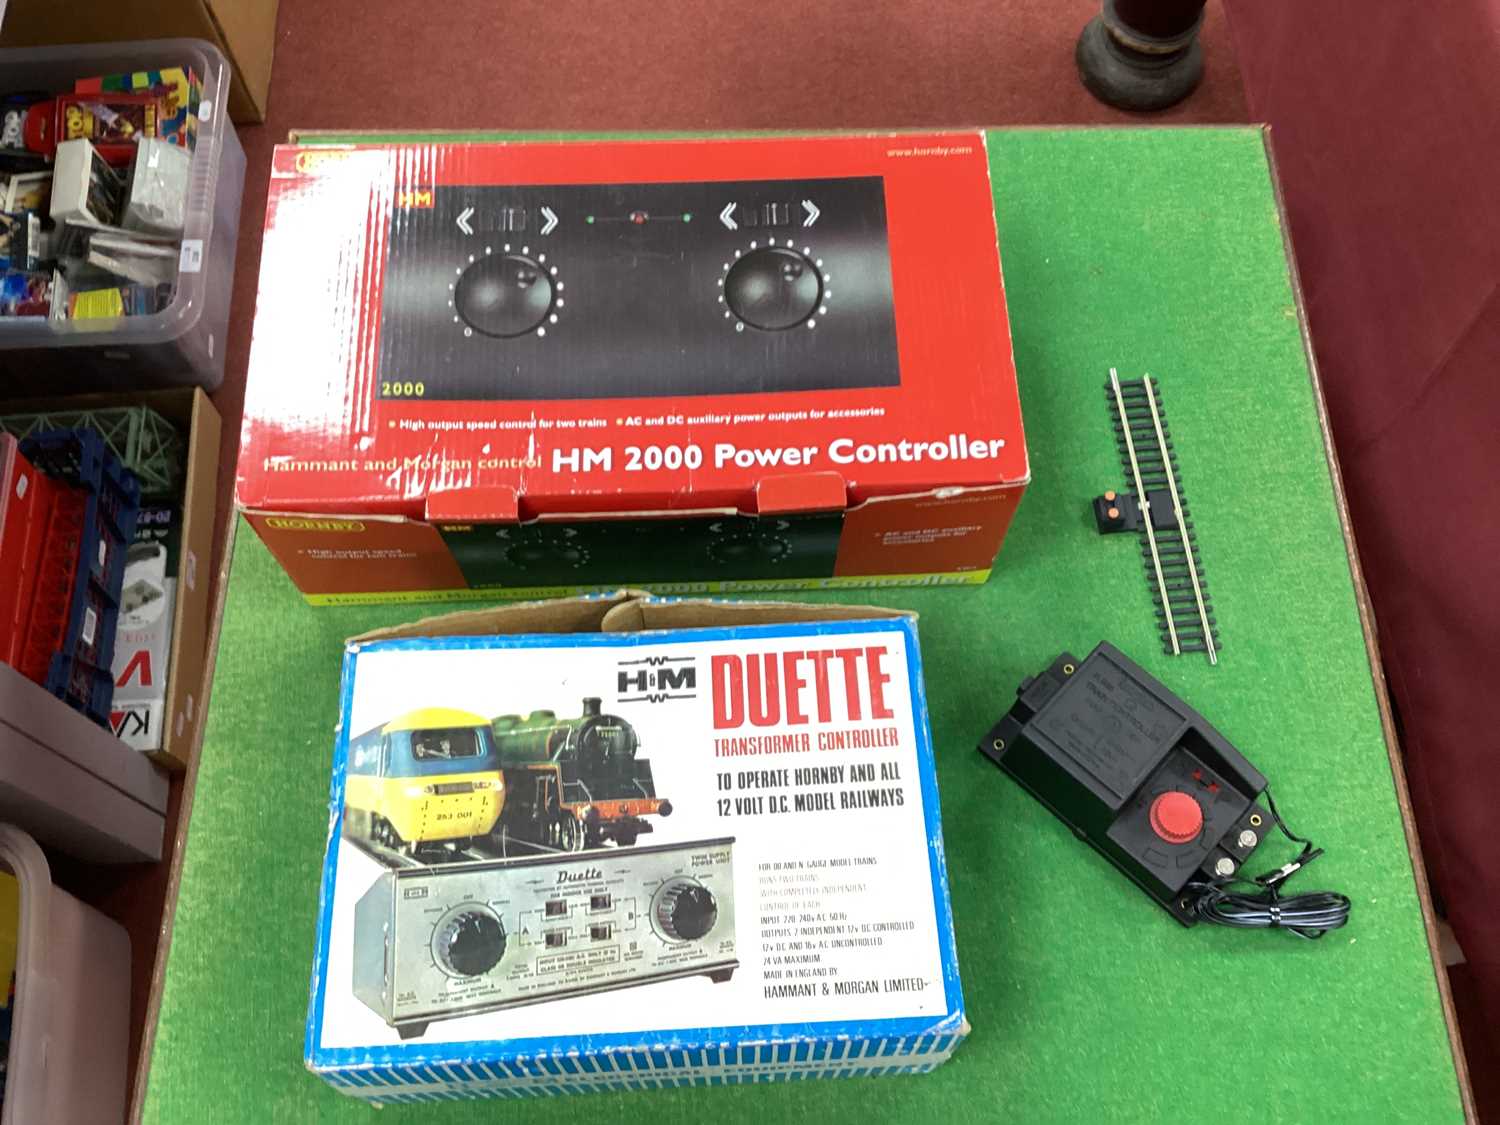 A Hornby Ref No. R8012 Boxed HM 2000 Power Controller, plus a Ref No. R985 Controller with